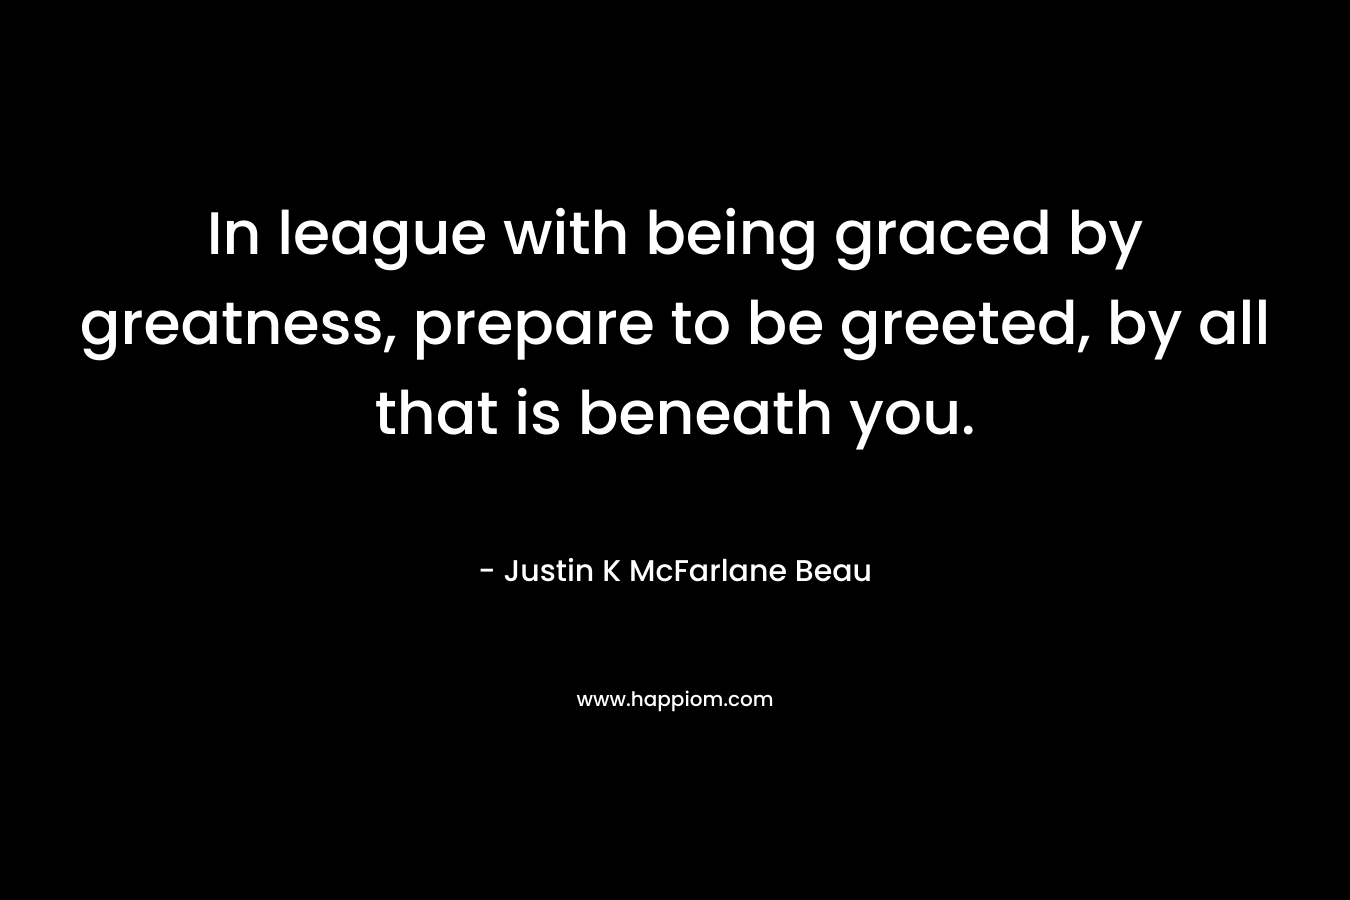 In league with being graced by greatness, prepare to be greeted, by all that is beneath you. – Justin K McFarlane Beau